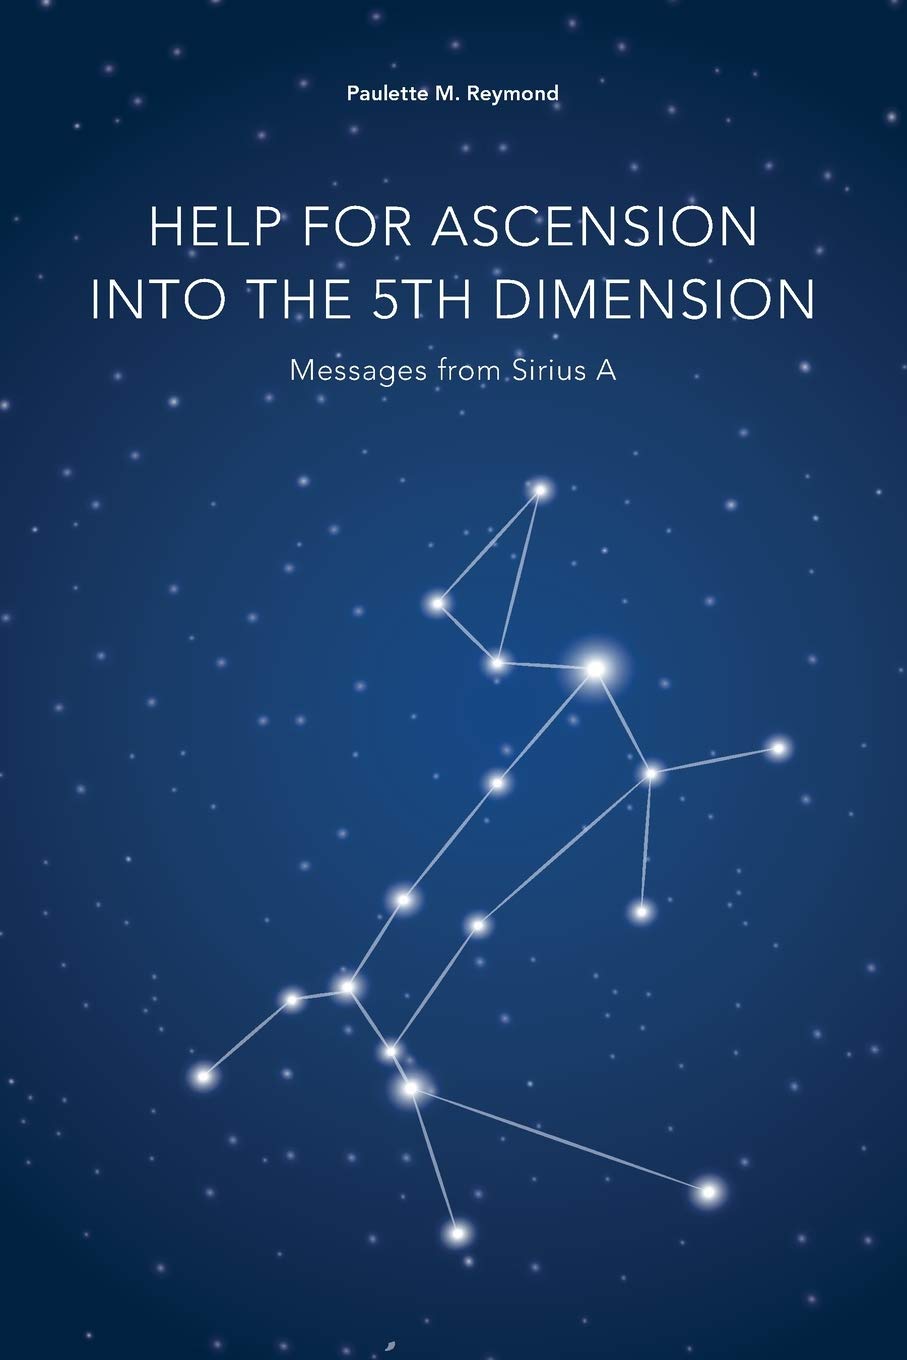 Help for Ascension into the 5th Dimension: Messages from Sirius A (Messages for the ascent into the 5th dimension)     Paperback – July 20, 2020